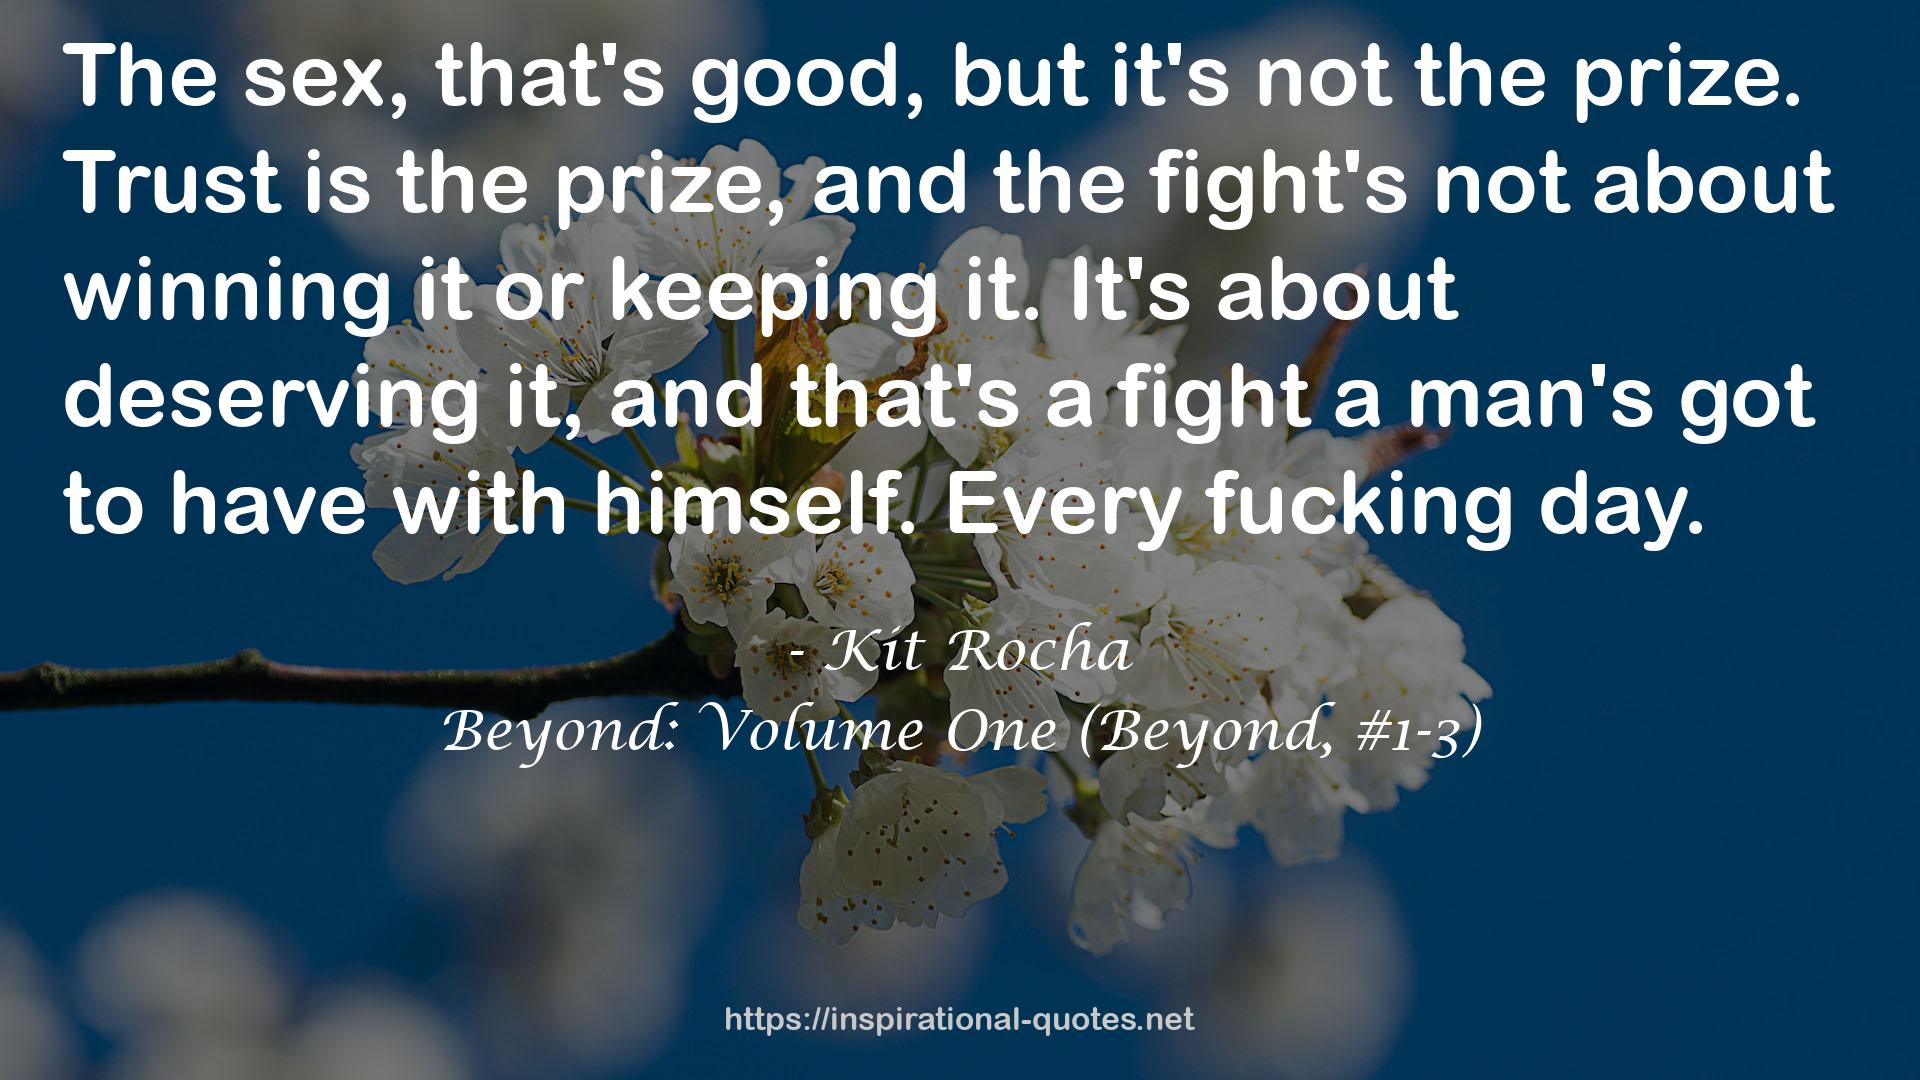 Beyond: Volume One (Beyond, #1-3) QUOTES